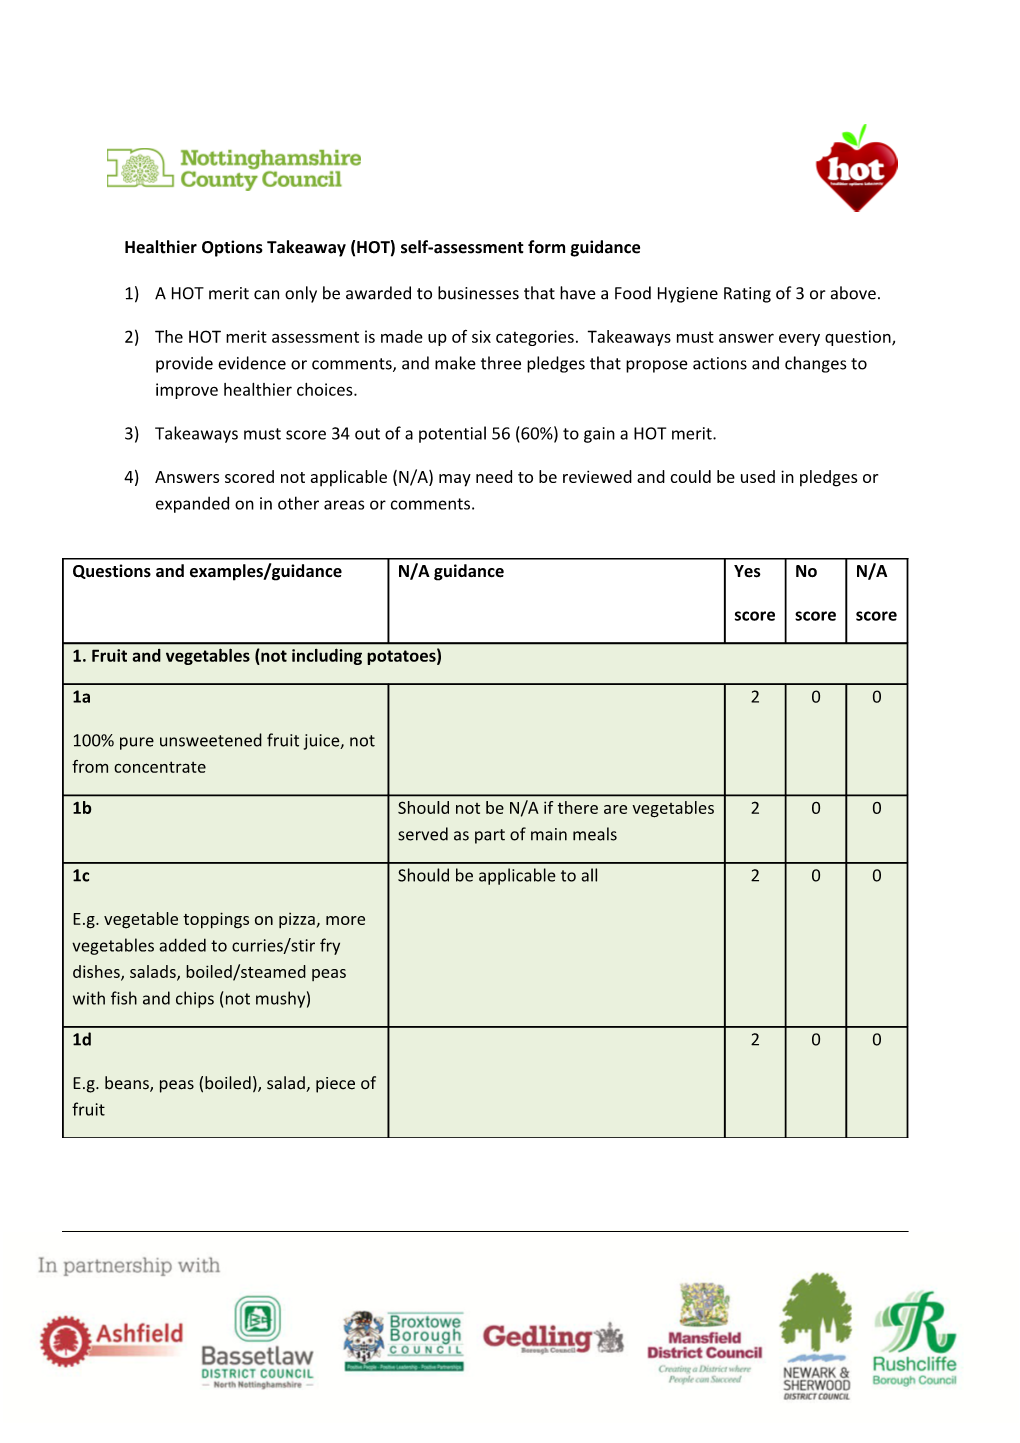 Healthier Options Takeaway (HOT) Self-Assessment Form Guidance